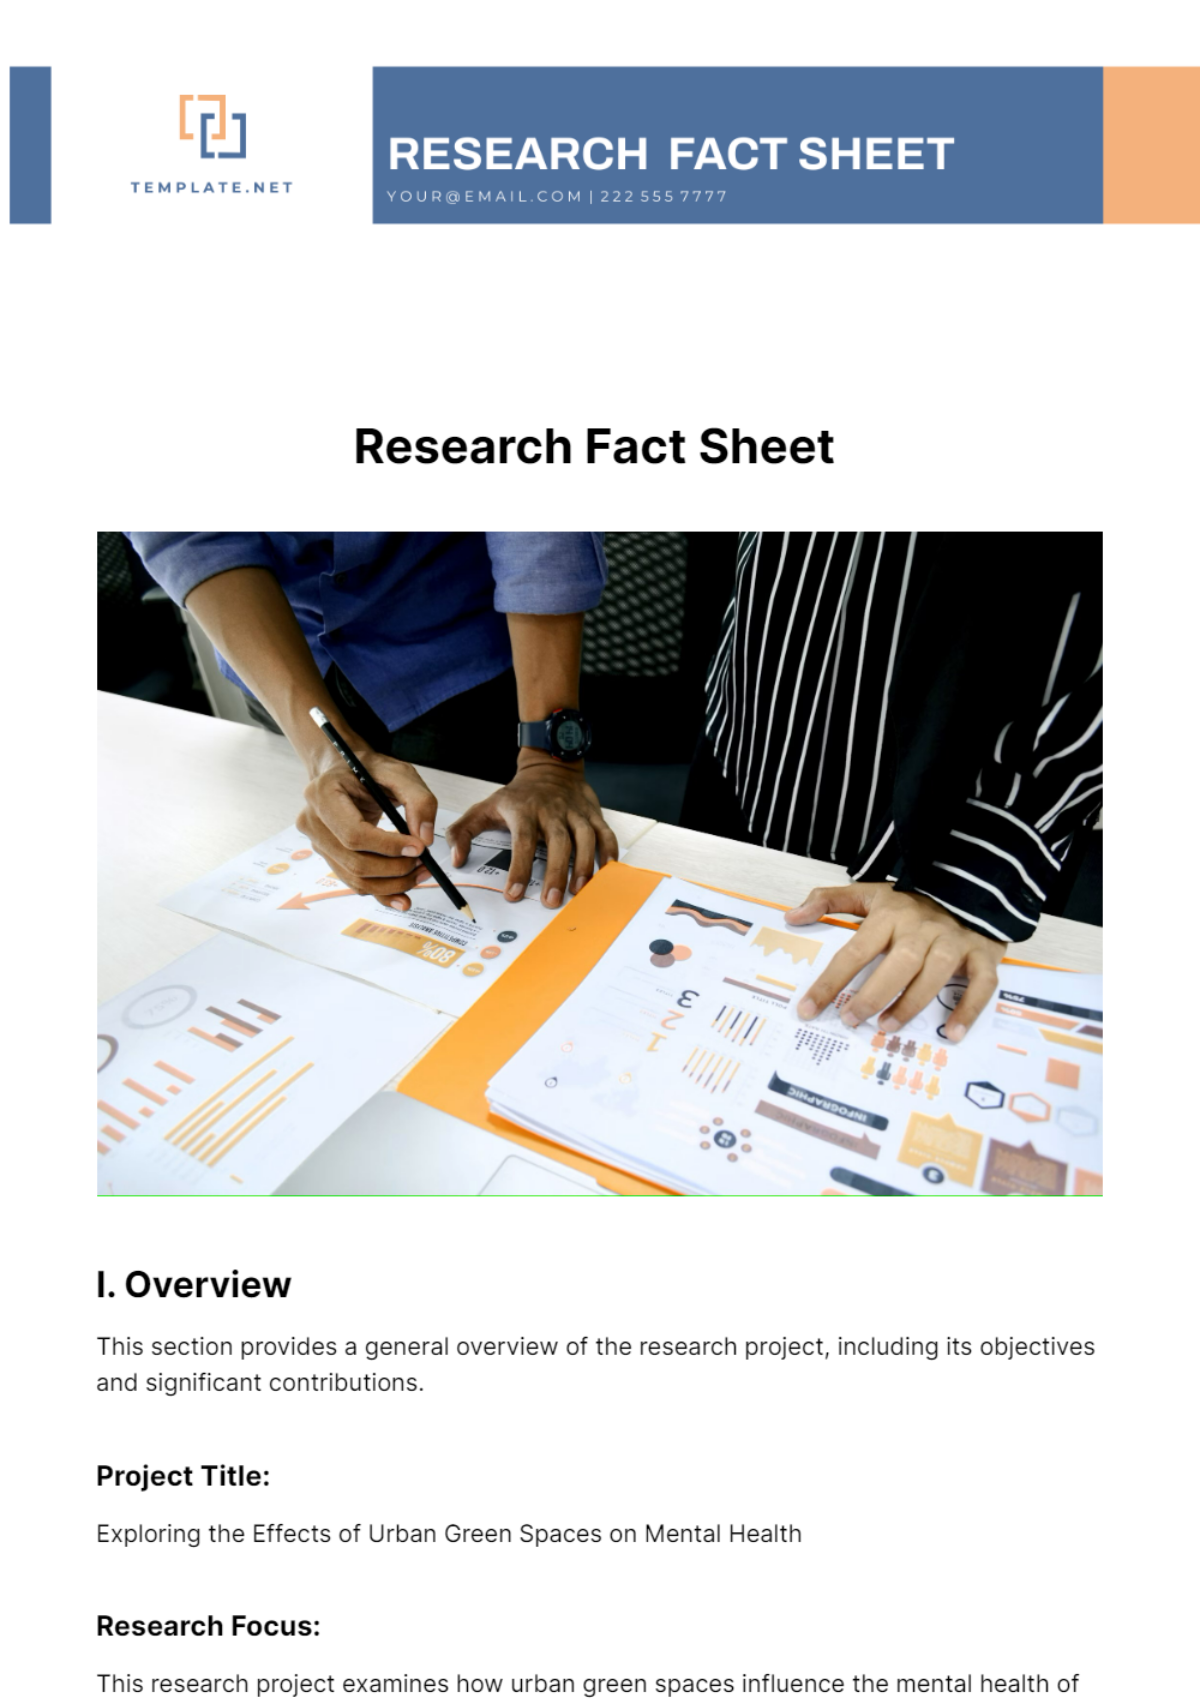 Free Research Fact Sheet Template